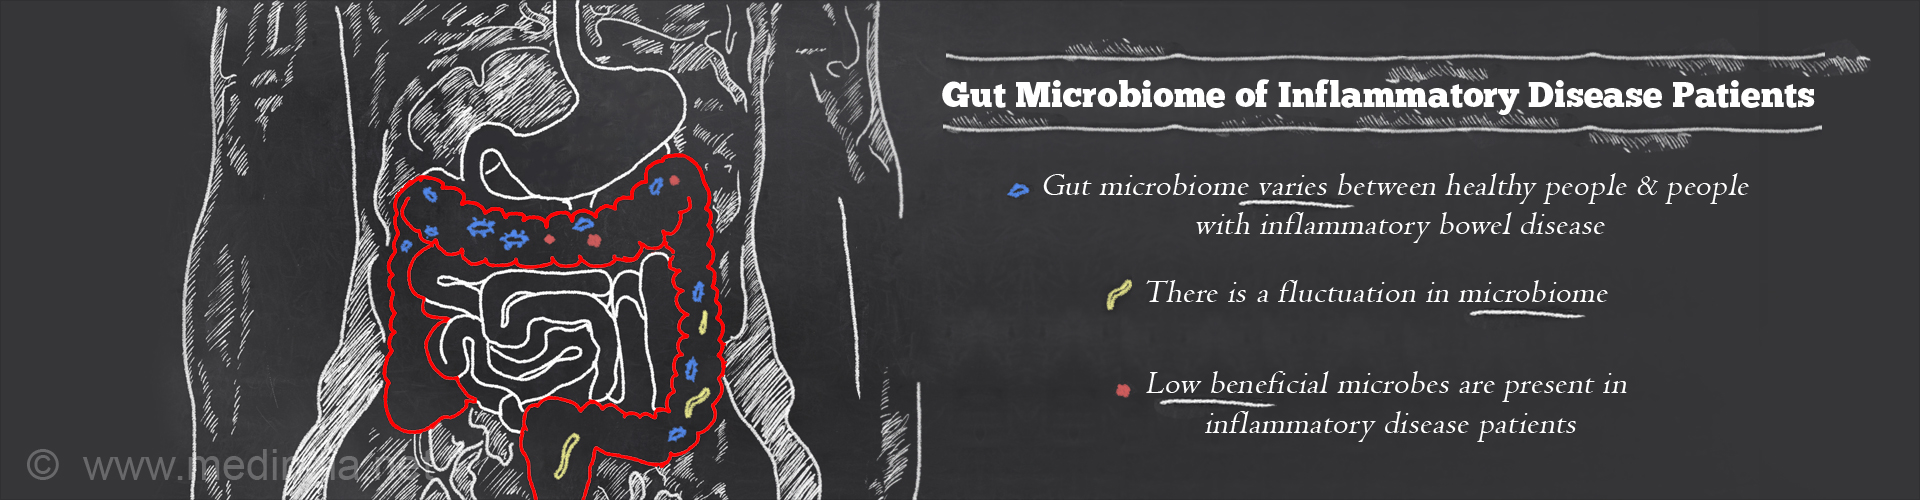 Gut Microbiome of Inflammatory Disease Patients

- Gut microbiome varies between healthy people & people with Inflammatory Bowel Disease
- There is a fluctuation in microbiome
- Low beneficial microbes are present in inflammatory disease patients